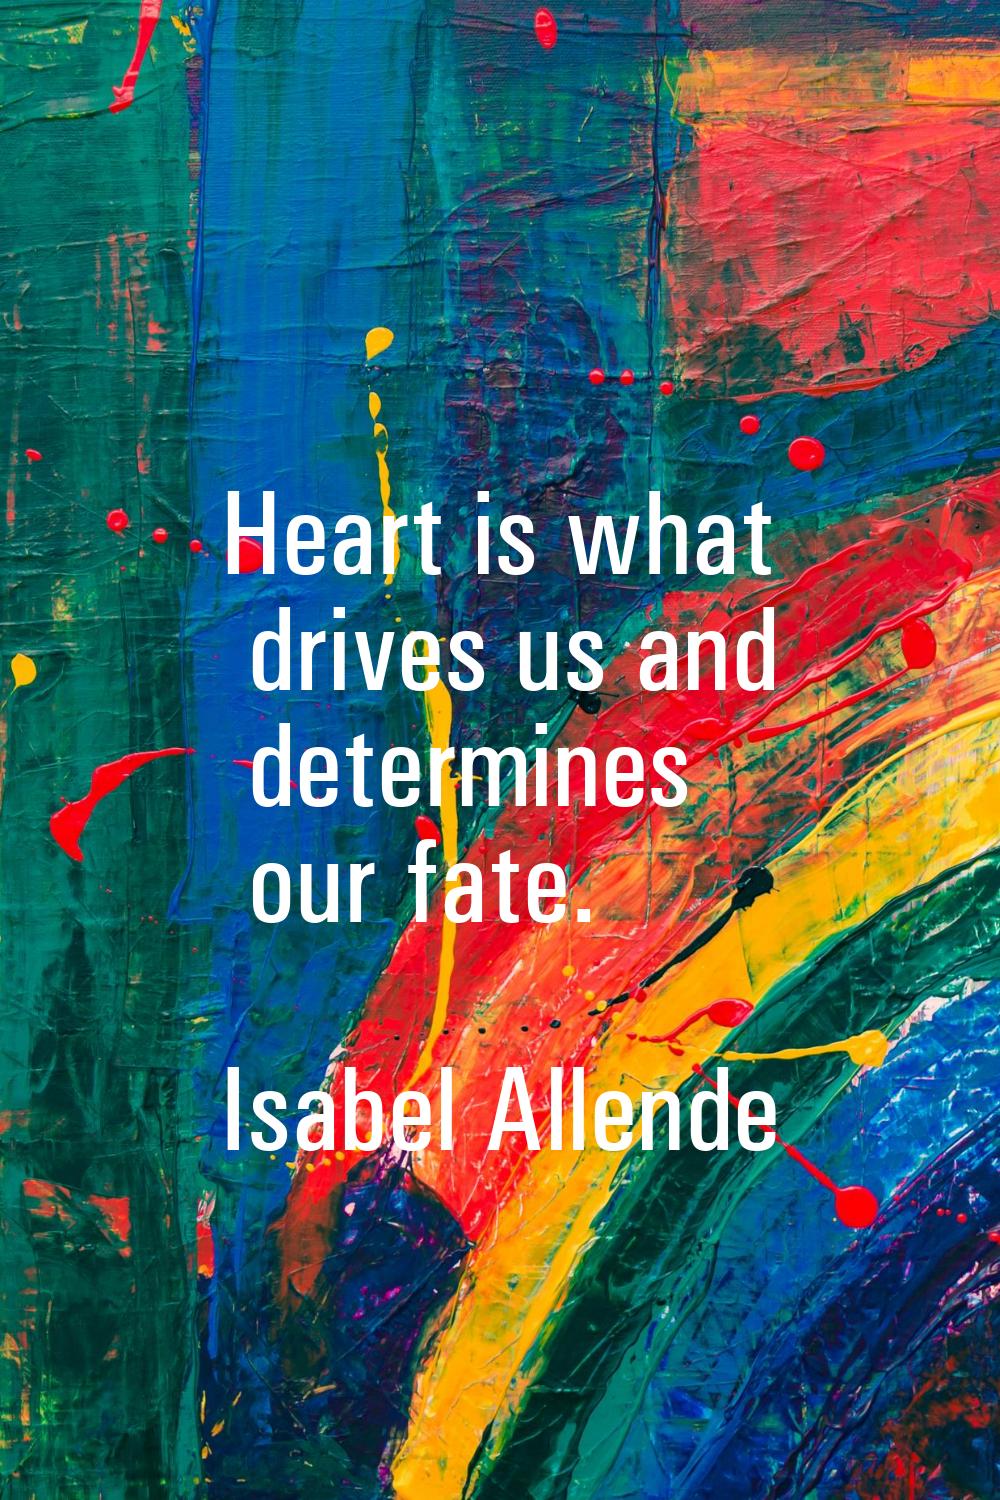 Heart is what drives us and determines our fate.